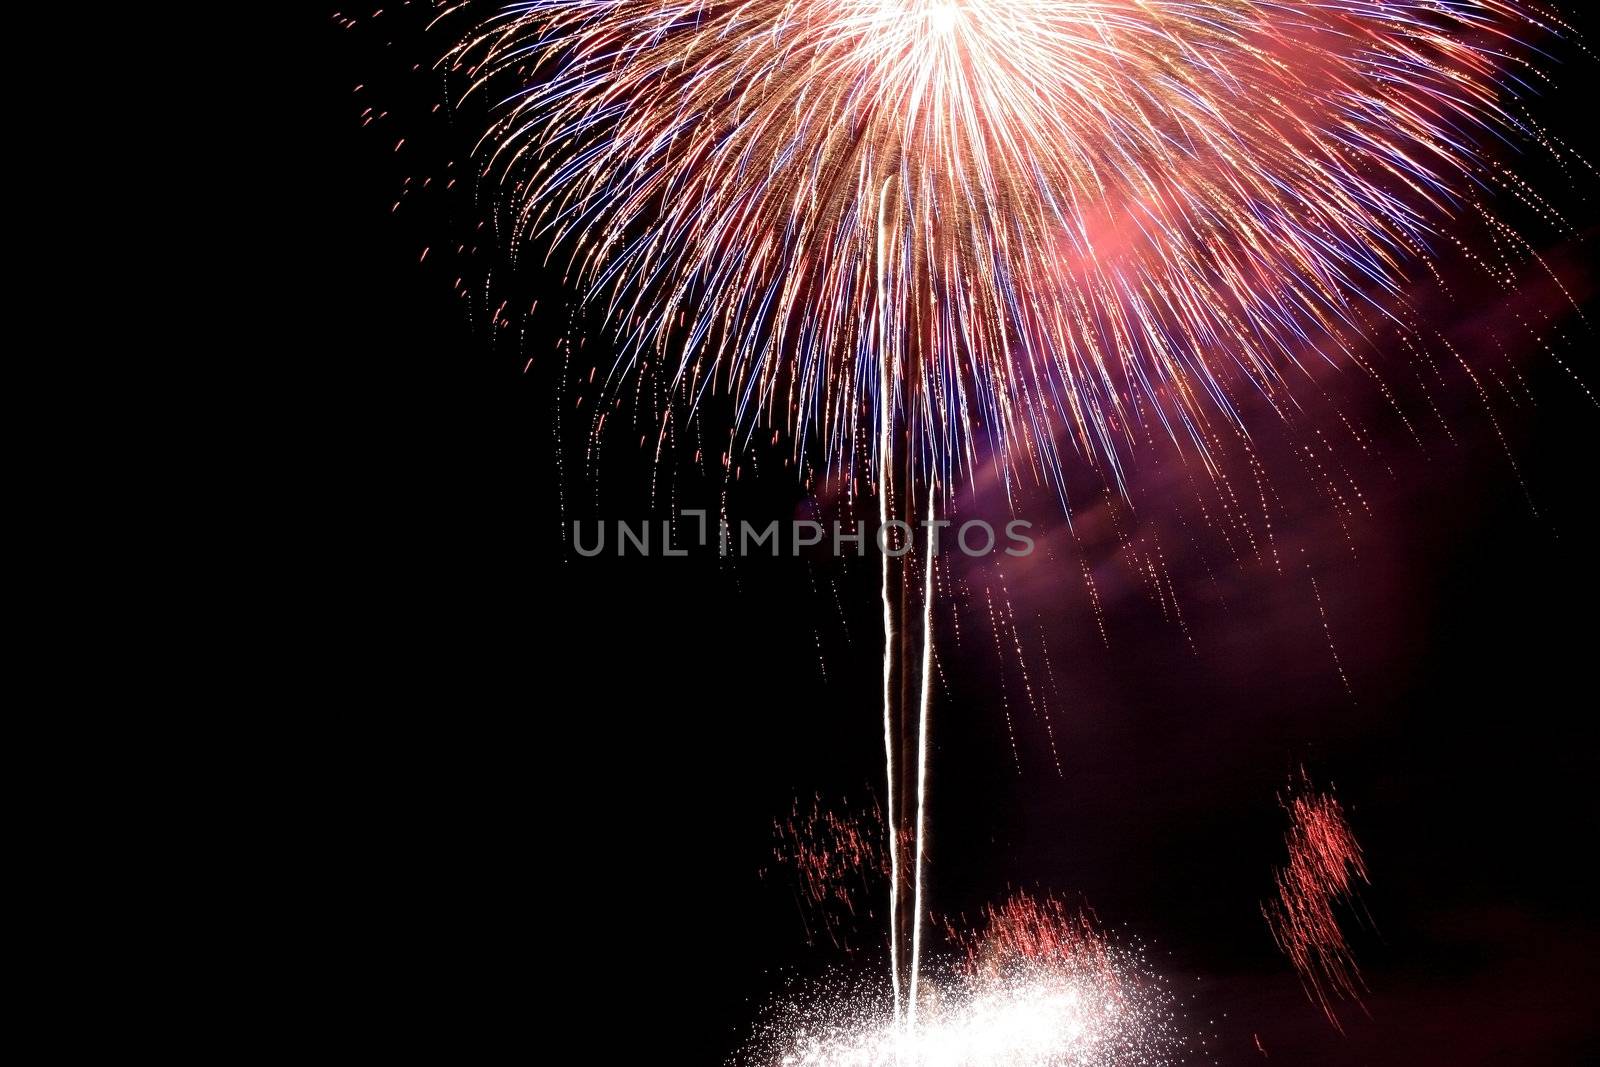 International Fireworks Competition at Han River in Seoul Korea